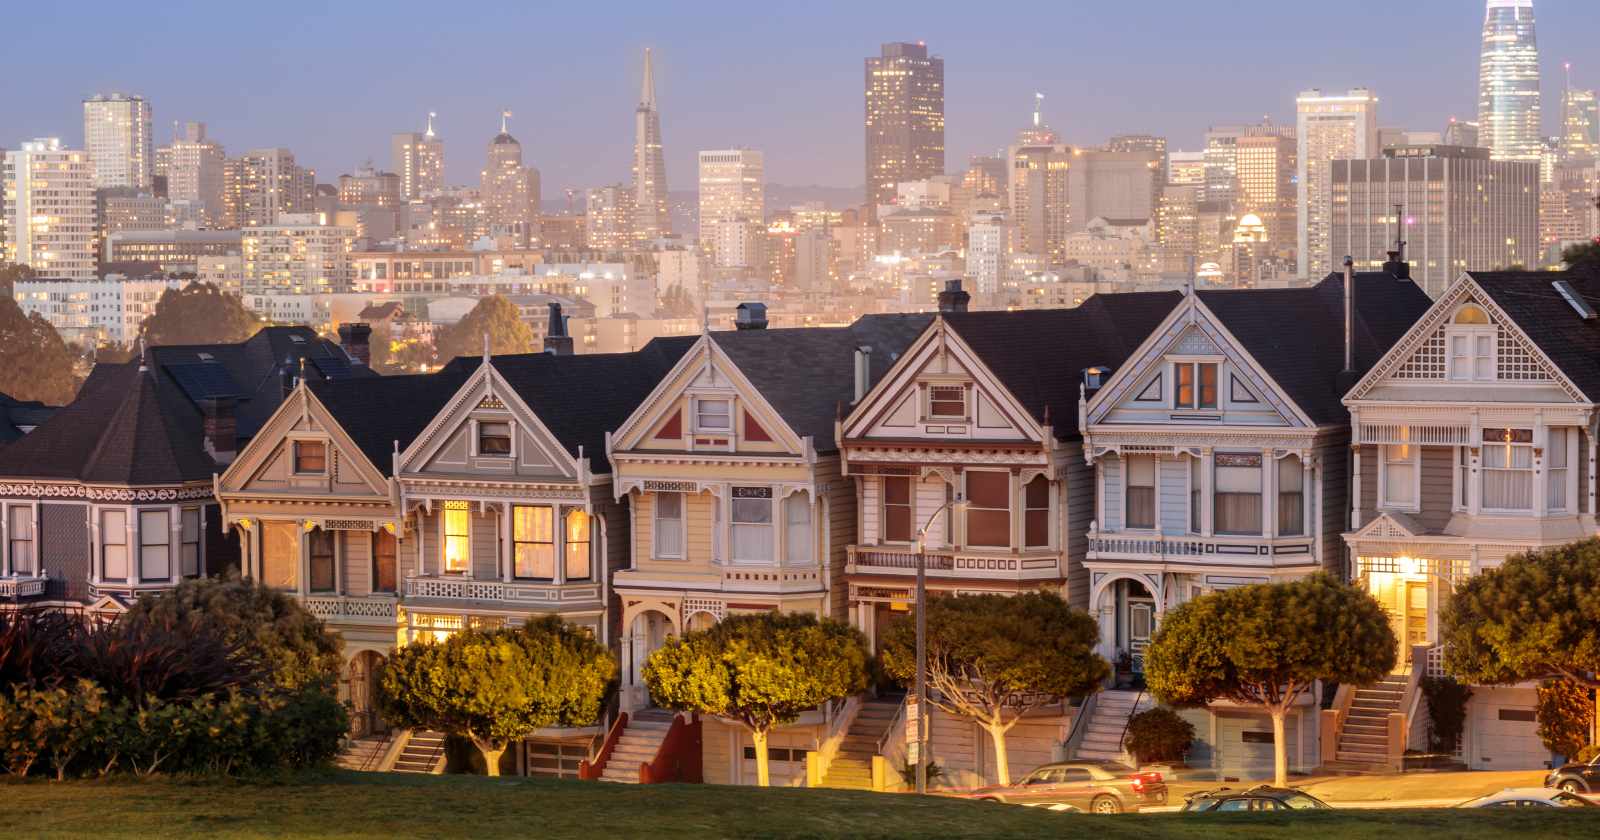 Sun setting over the painted lady houses in SF.